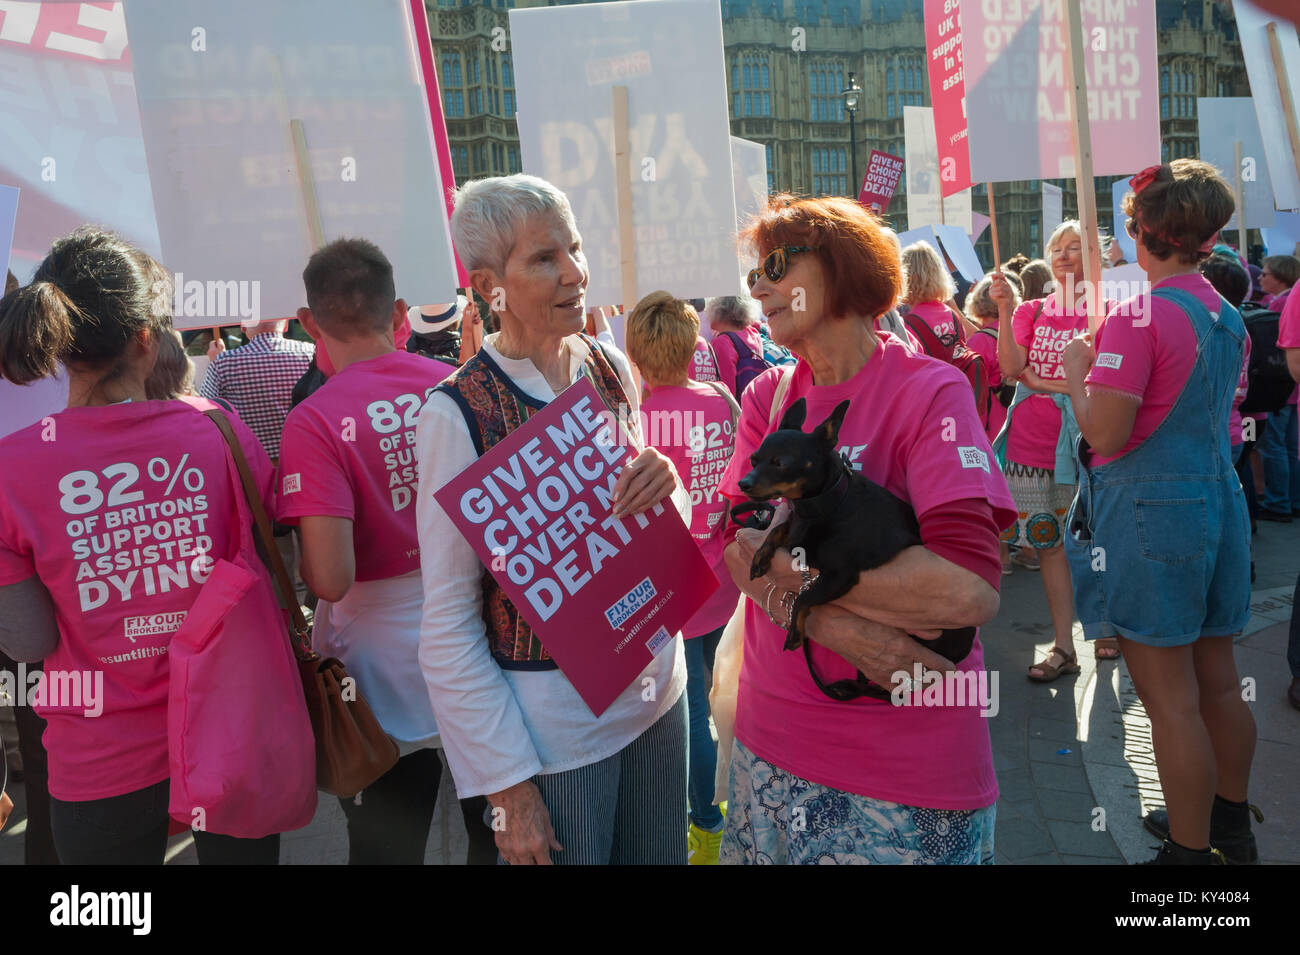 Supporters of the Assisted Suicide Bill in Old Palace Yard with Dignity in Dying t-shirts claim 82% pf Britons support assisted dying. Stock Photo